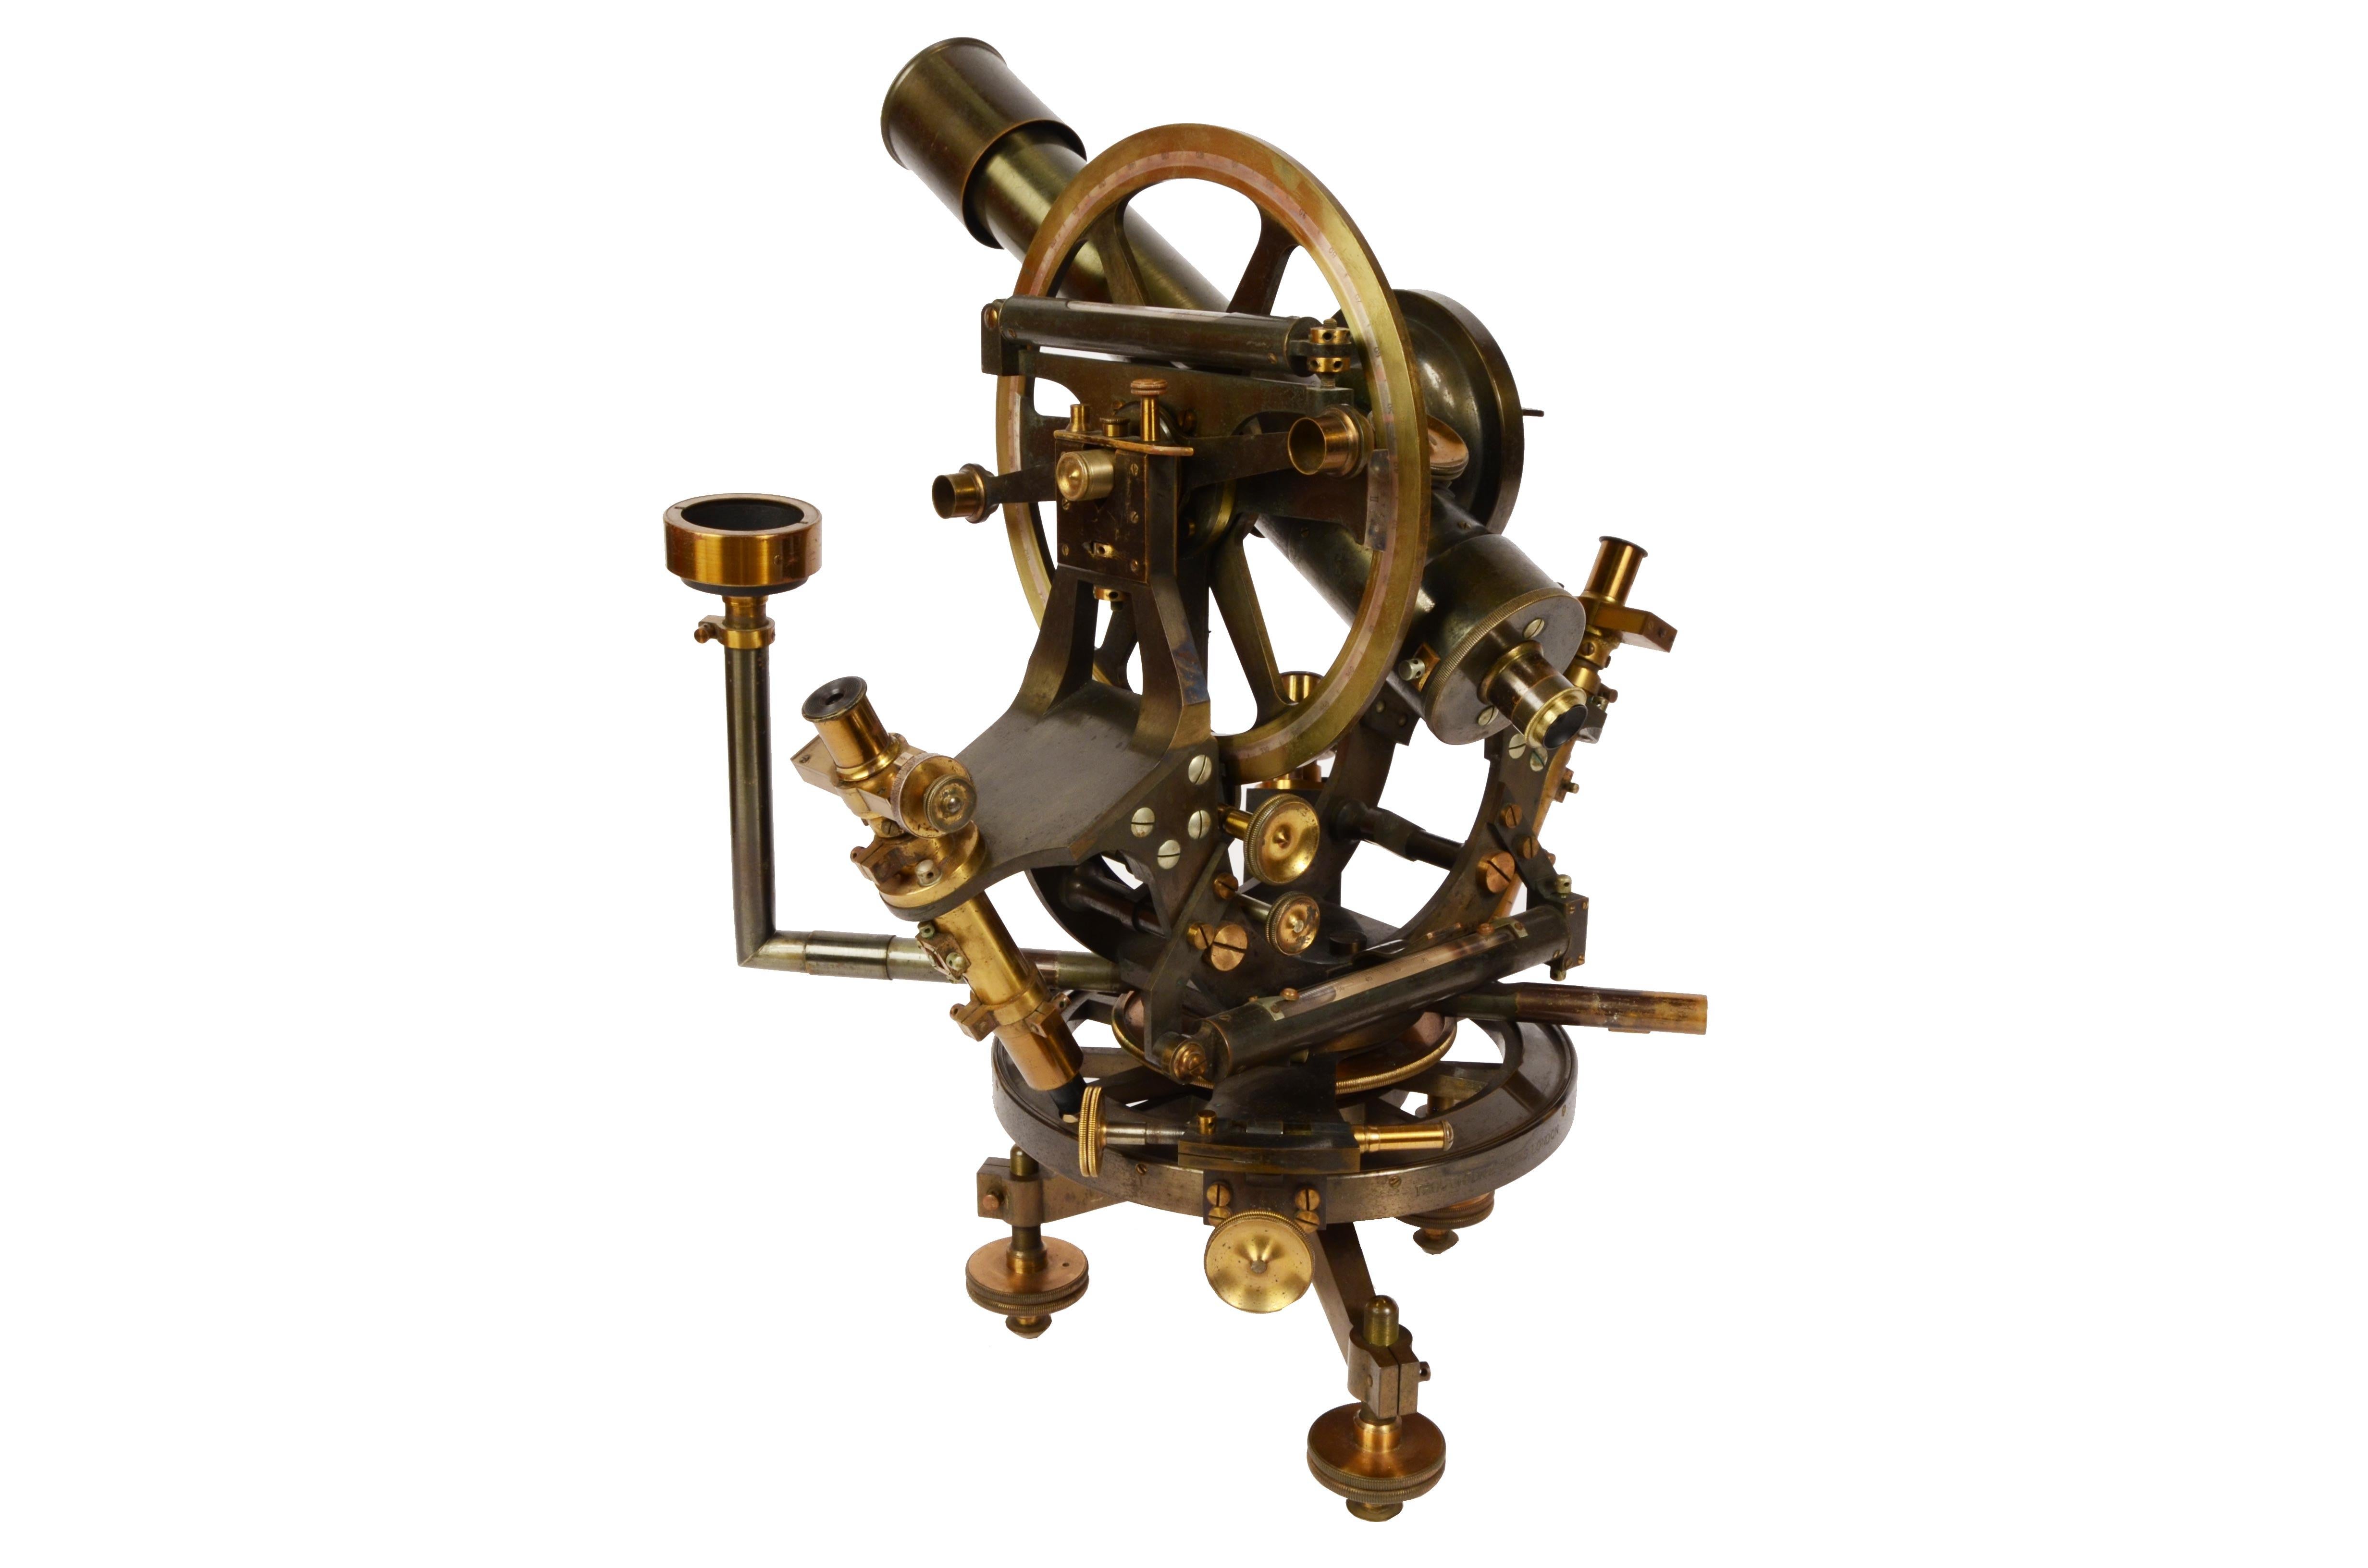 Theodolite in burnished brass signed Troughton & Simms London and housed in two wooden cases from the second half of the nineteenth century. Three-spoke base with adjustment screws, large horizontal and vertical graduated circle with opposing